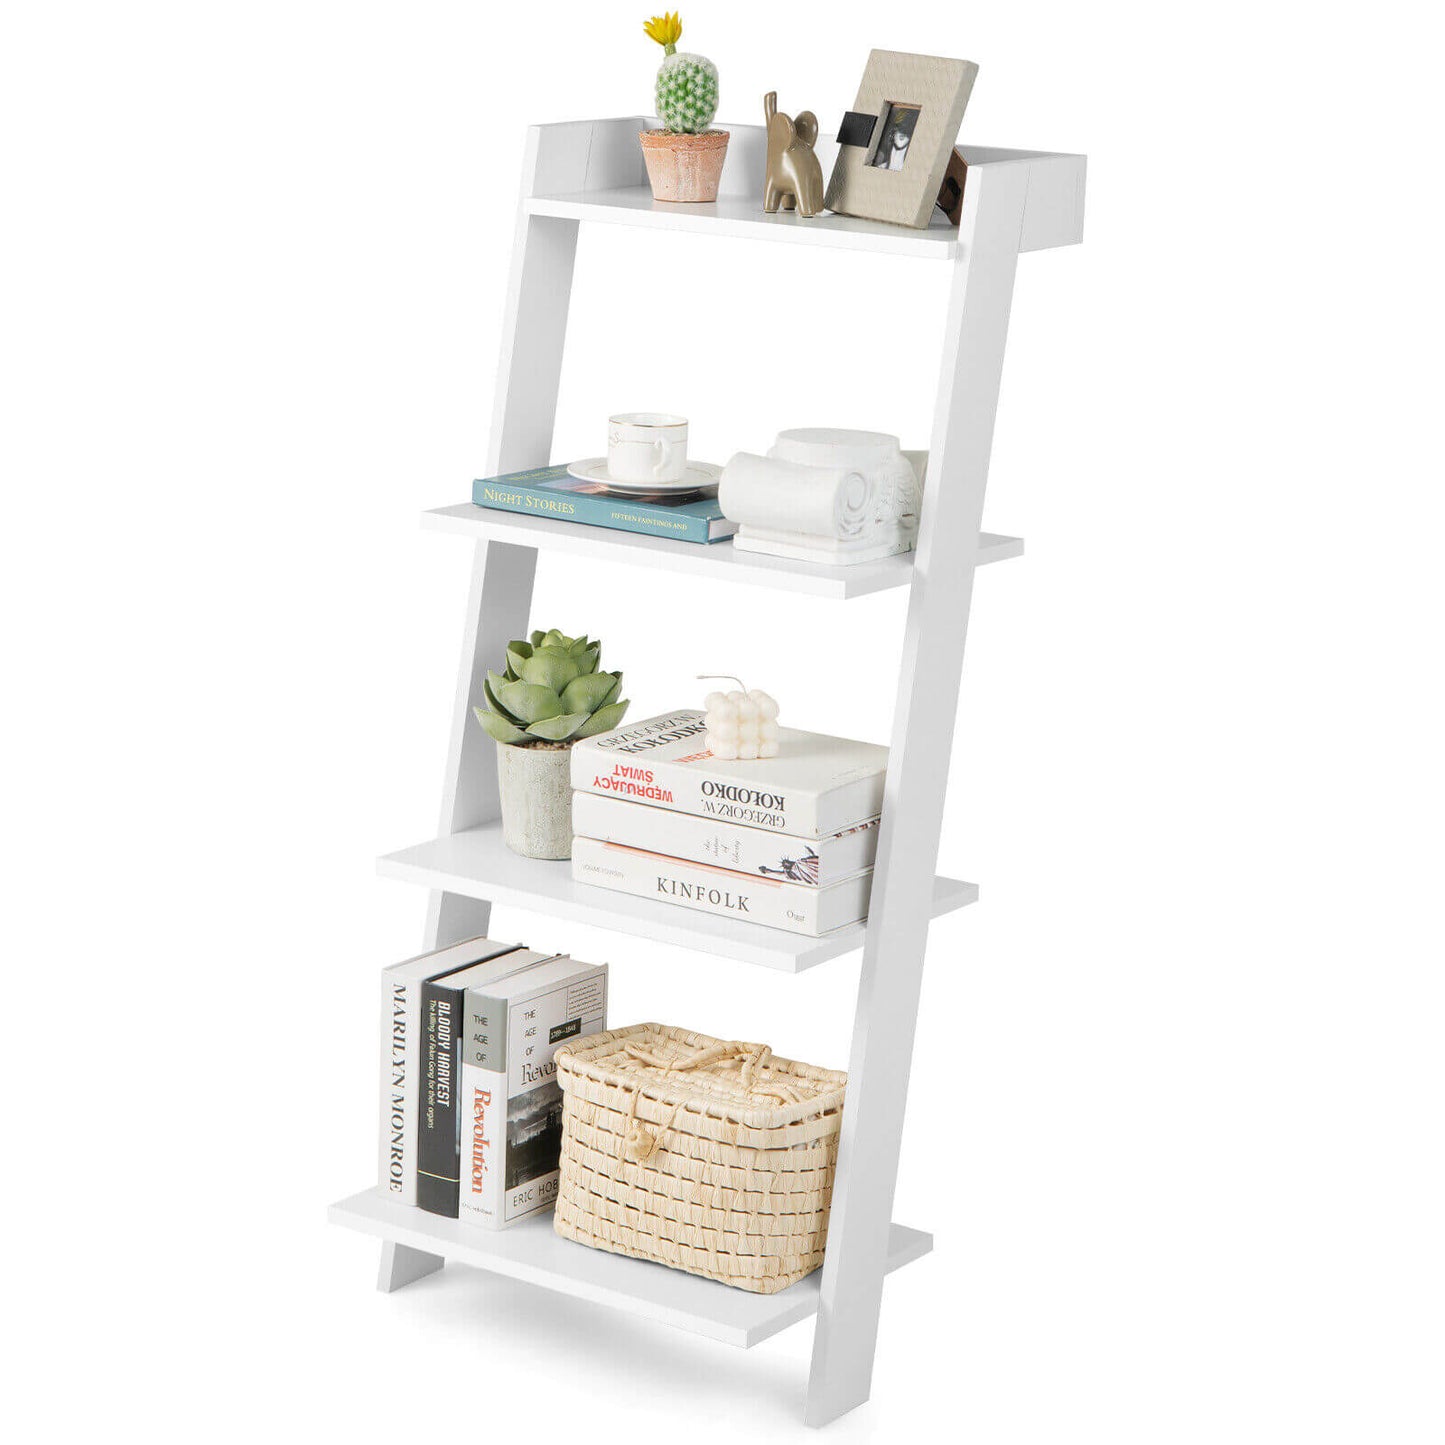 4-Tier Ladder Shelf with Solid Frame and Anti-toppling Device, White - Gallery Canada